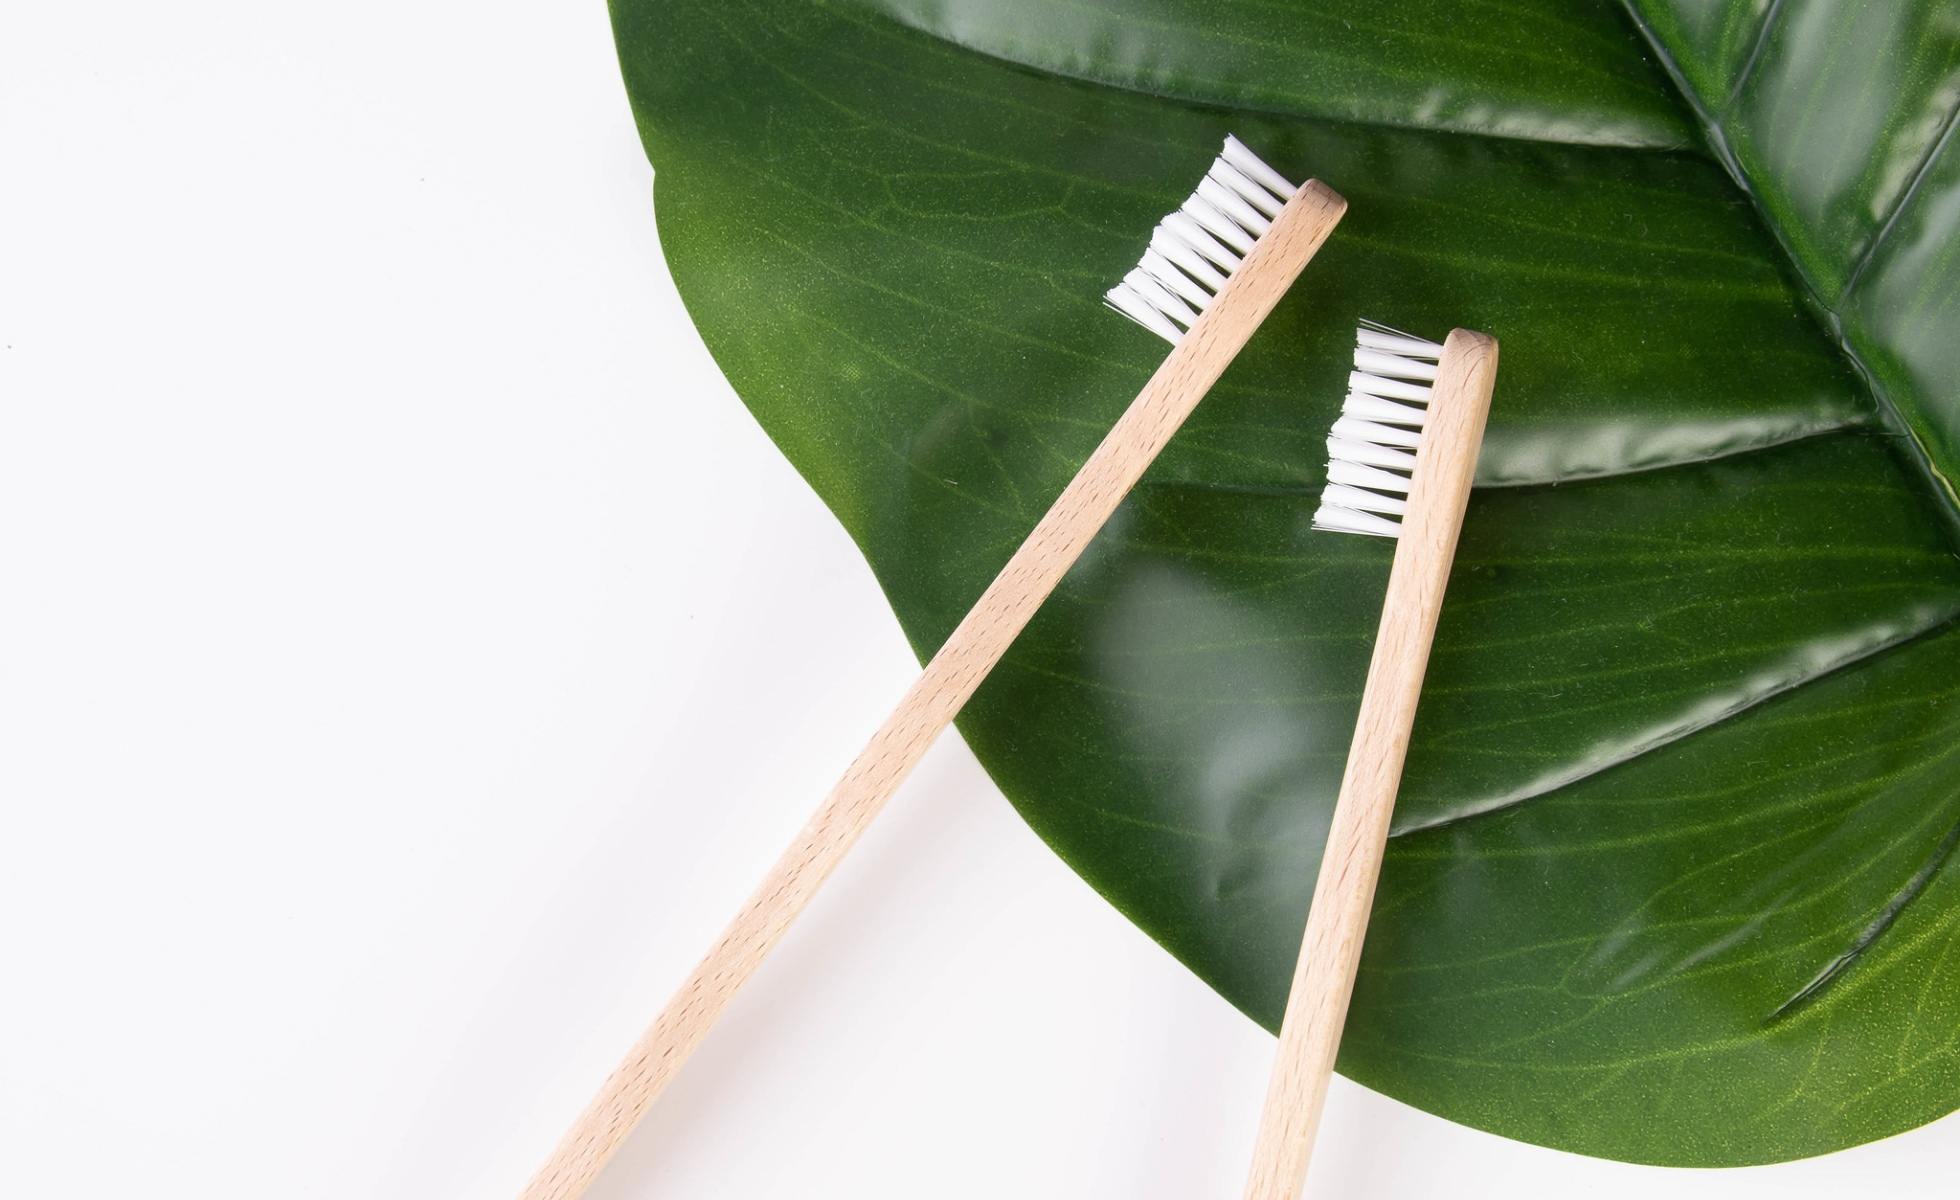 Two bamboo toothbrushes on a tropical plant leaf